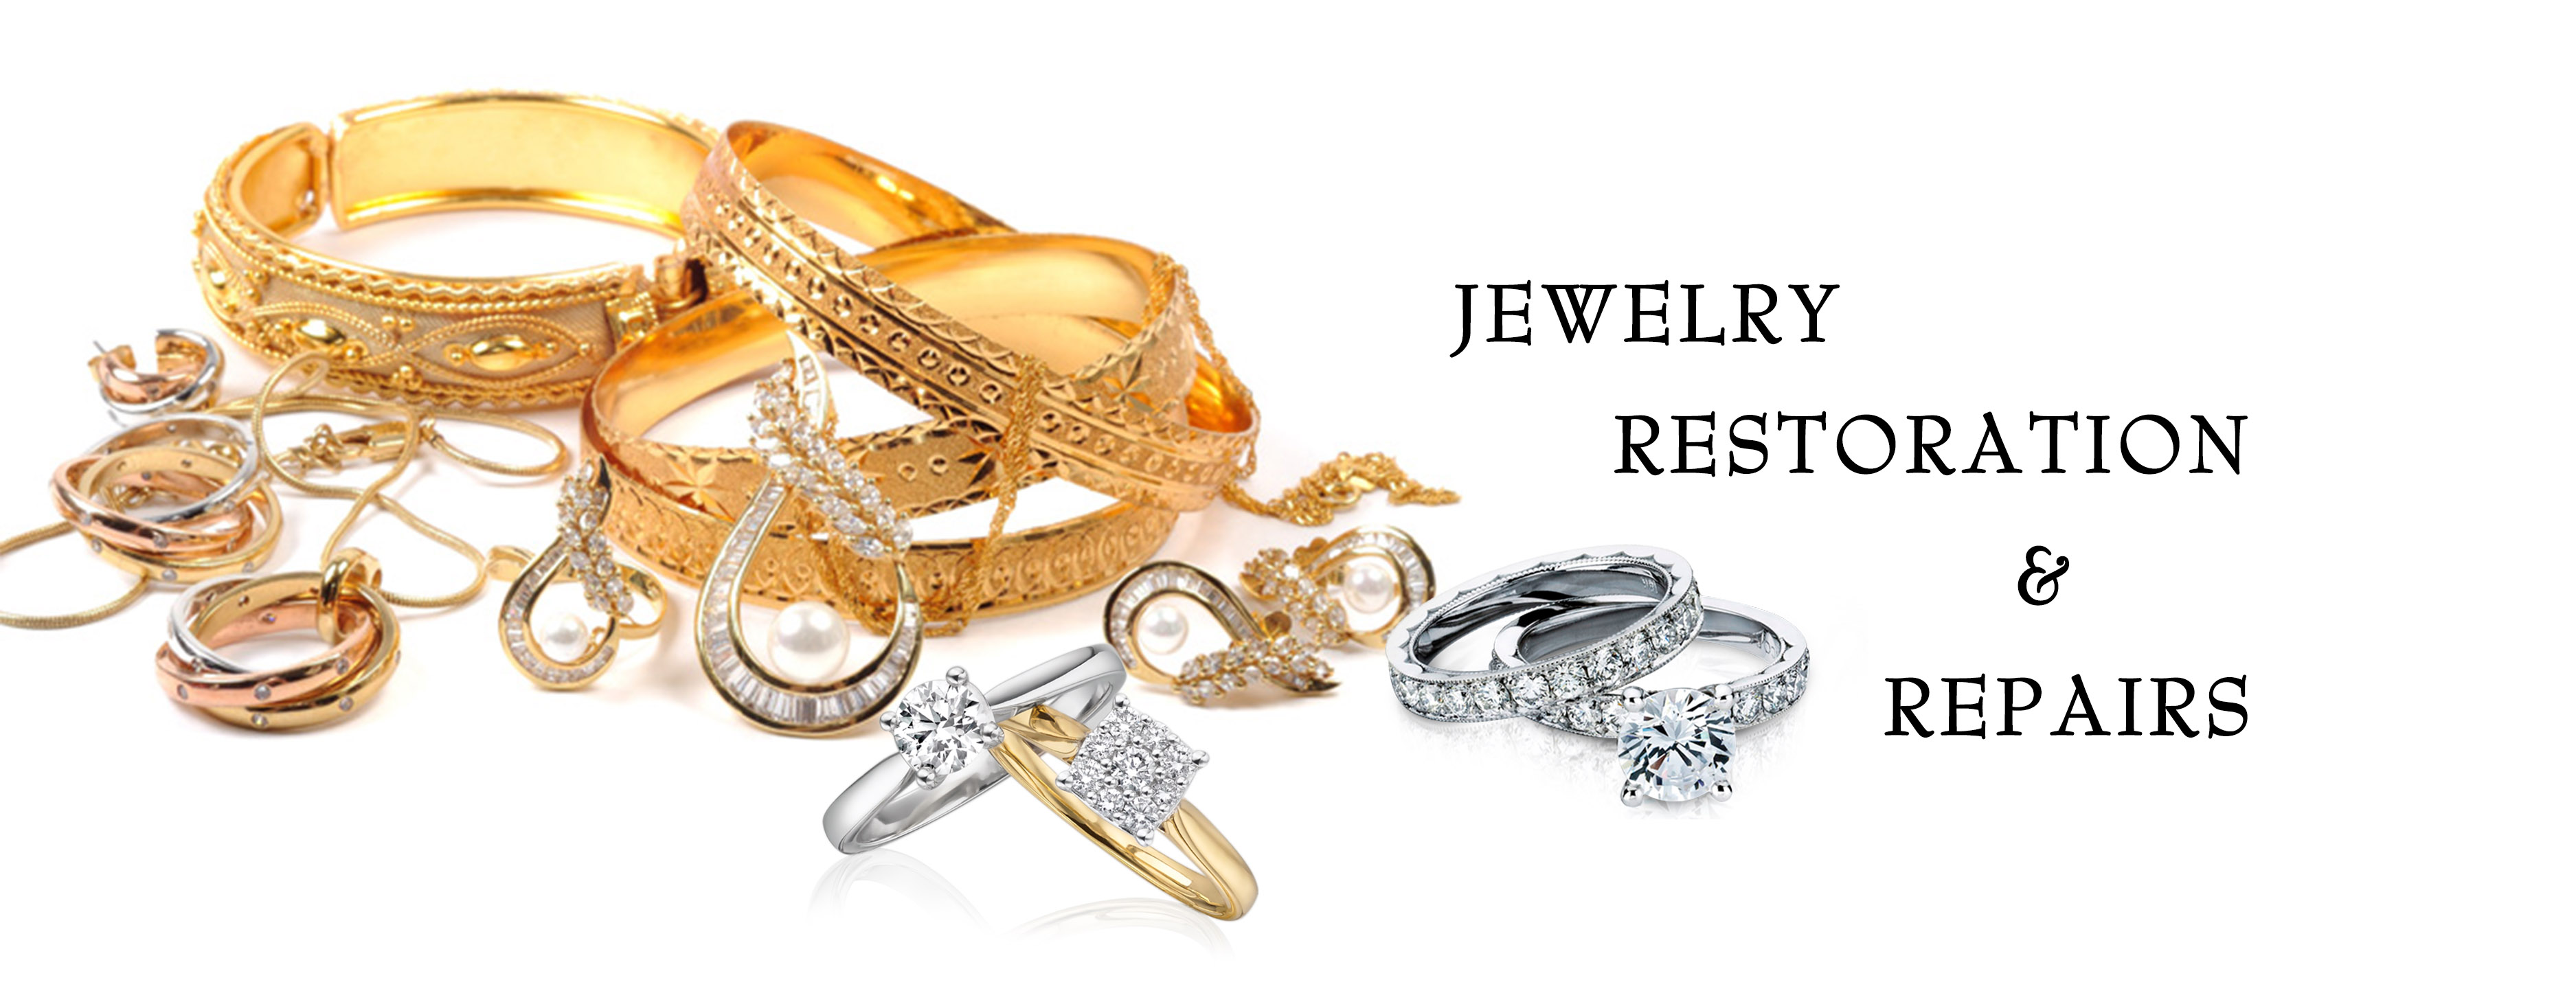 Marlow's Fine Jewelry | Family Owned